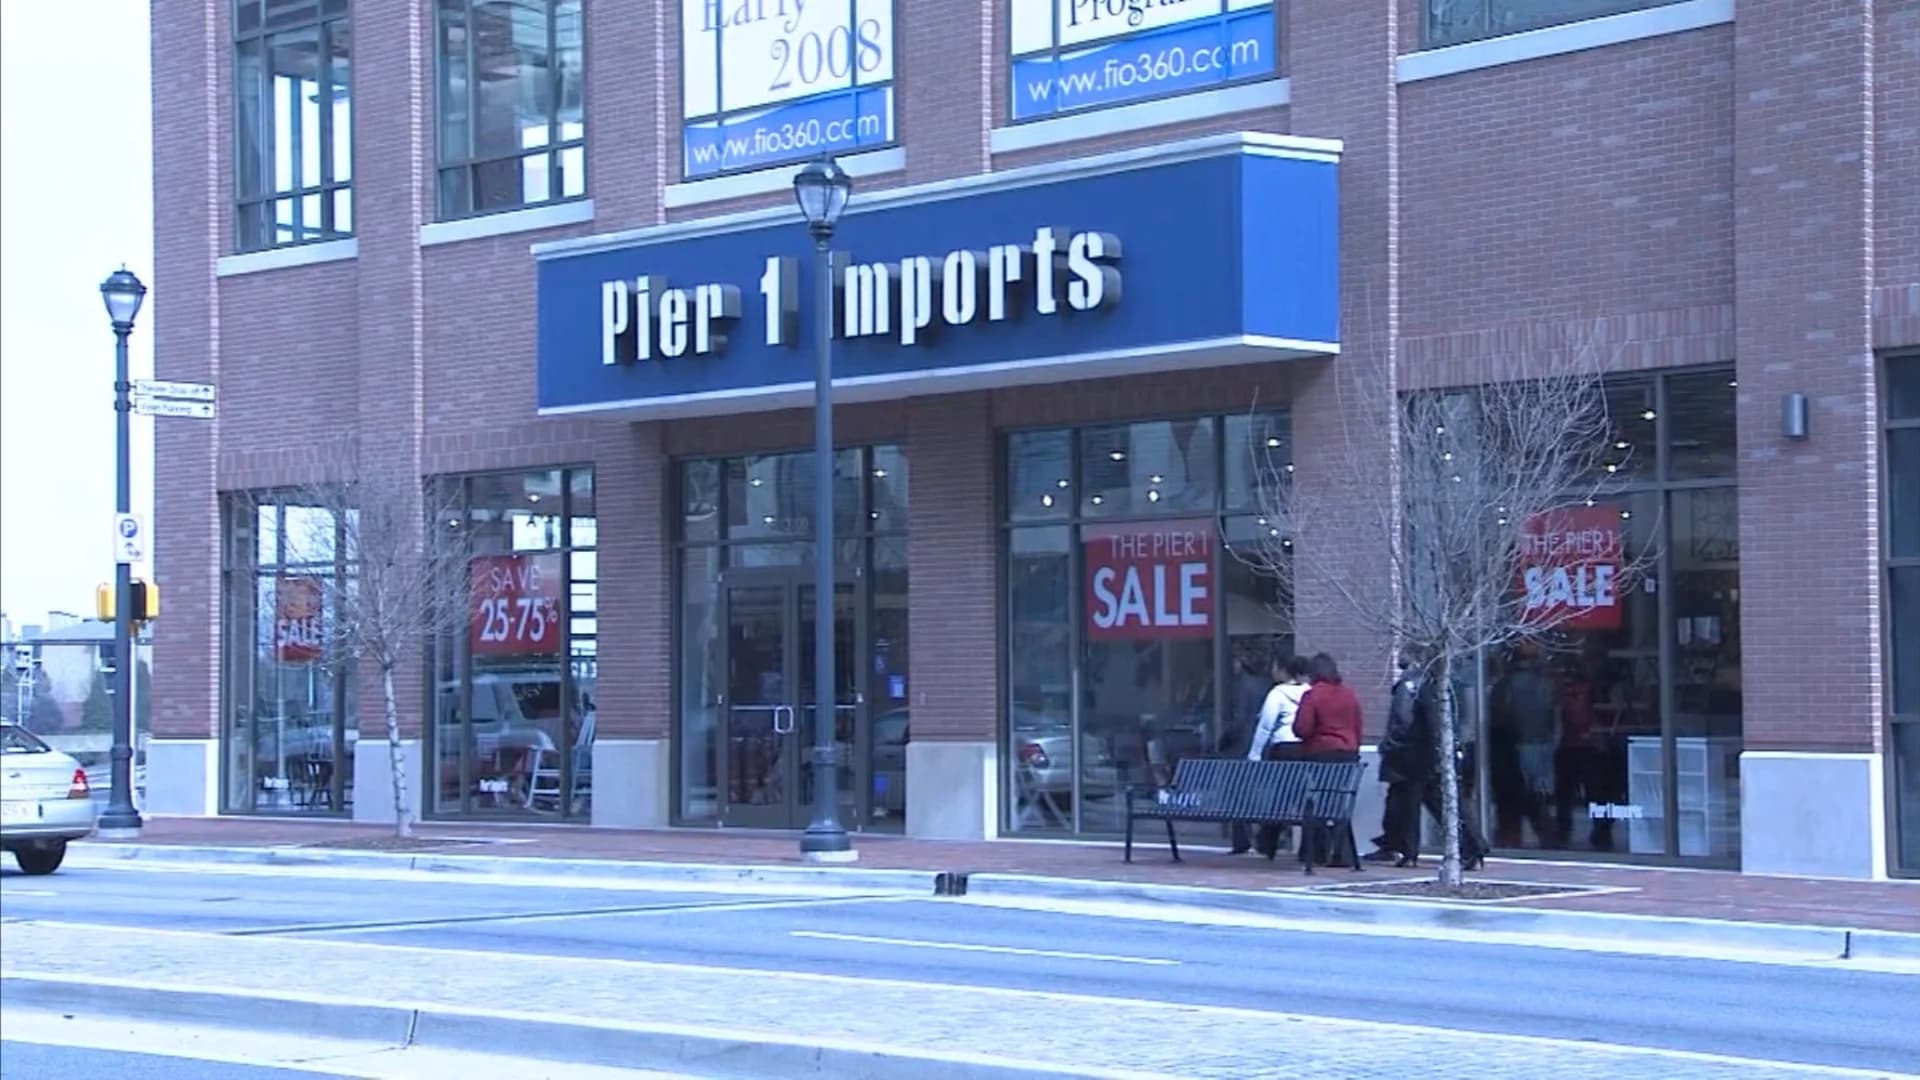 Pier 1 files for Chapter 11 bankruptcy protection